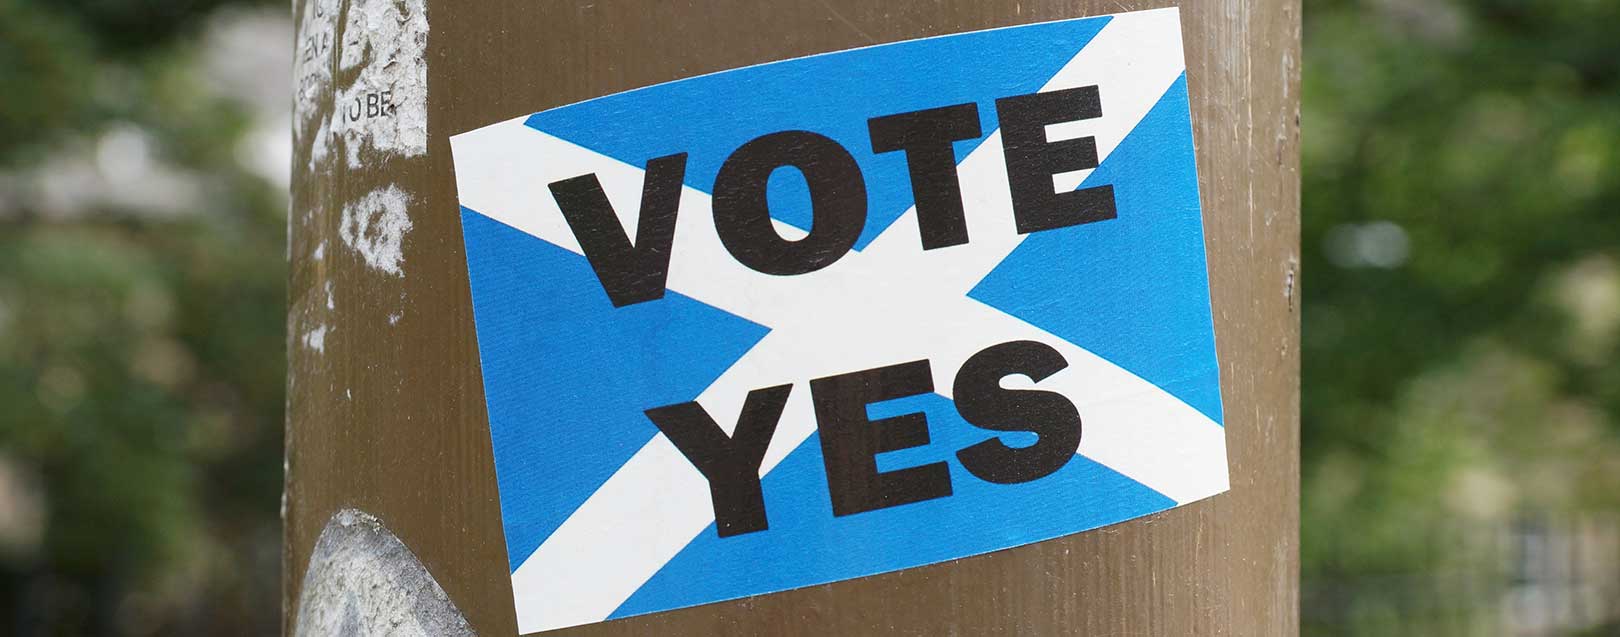 Scotland wants to vote for independence post-Brexit